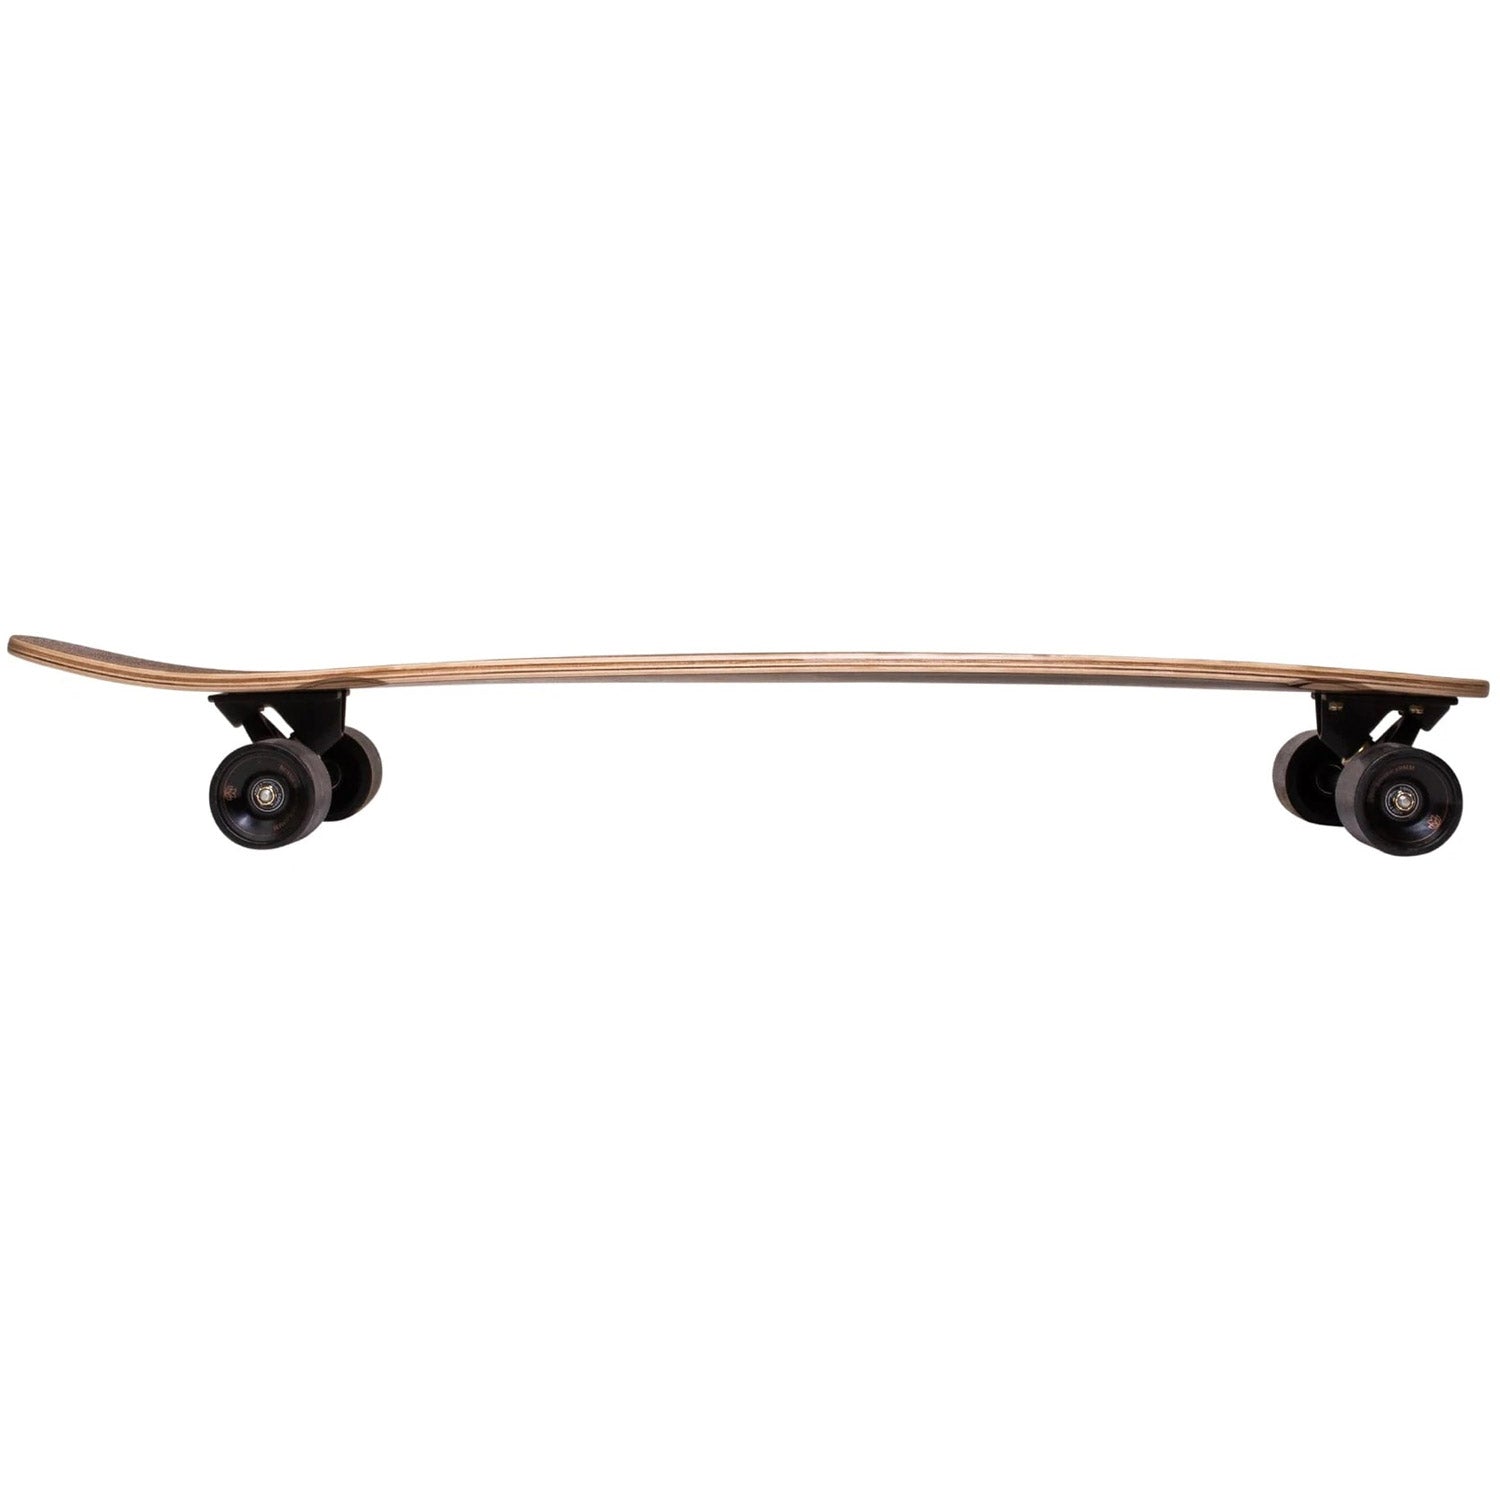 Ruins to Roses Roundtail Cruiser Complete Skateboard